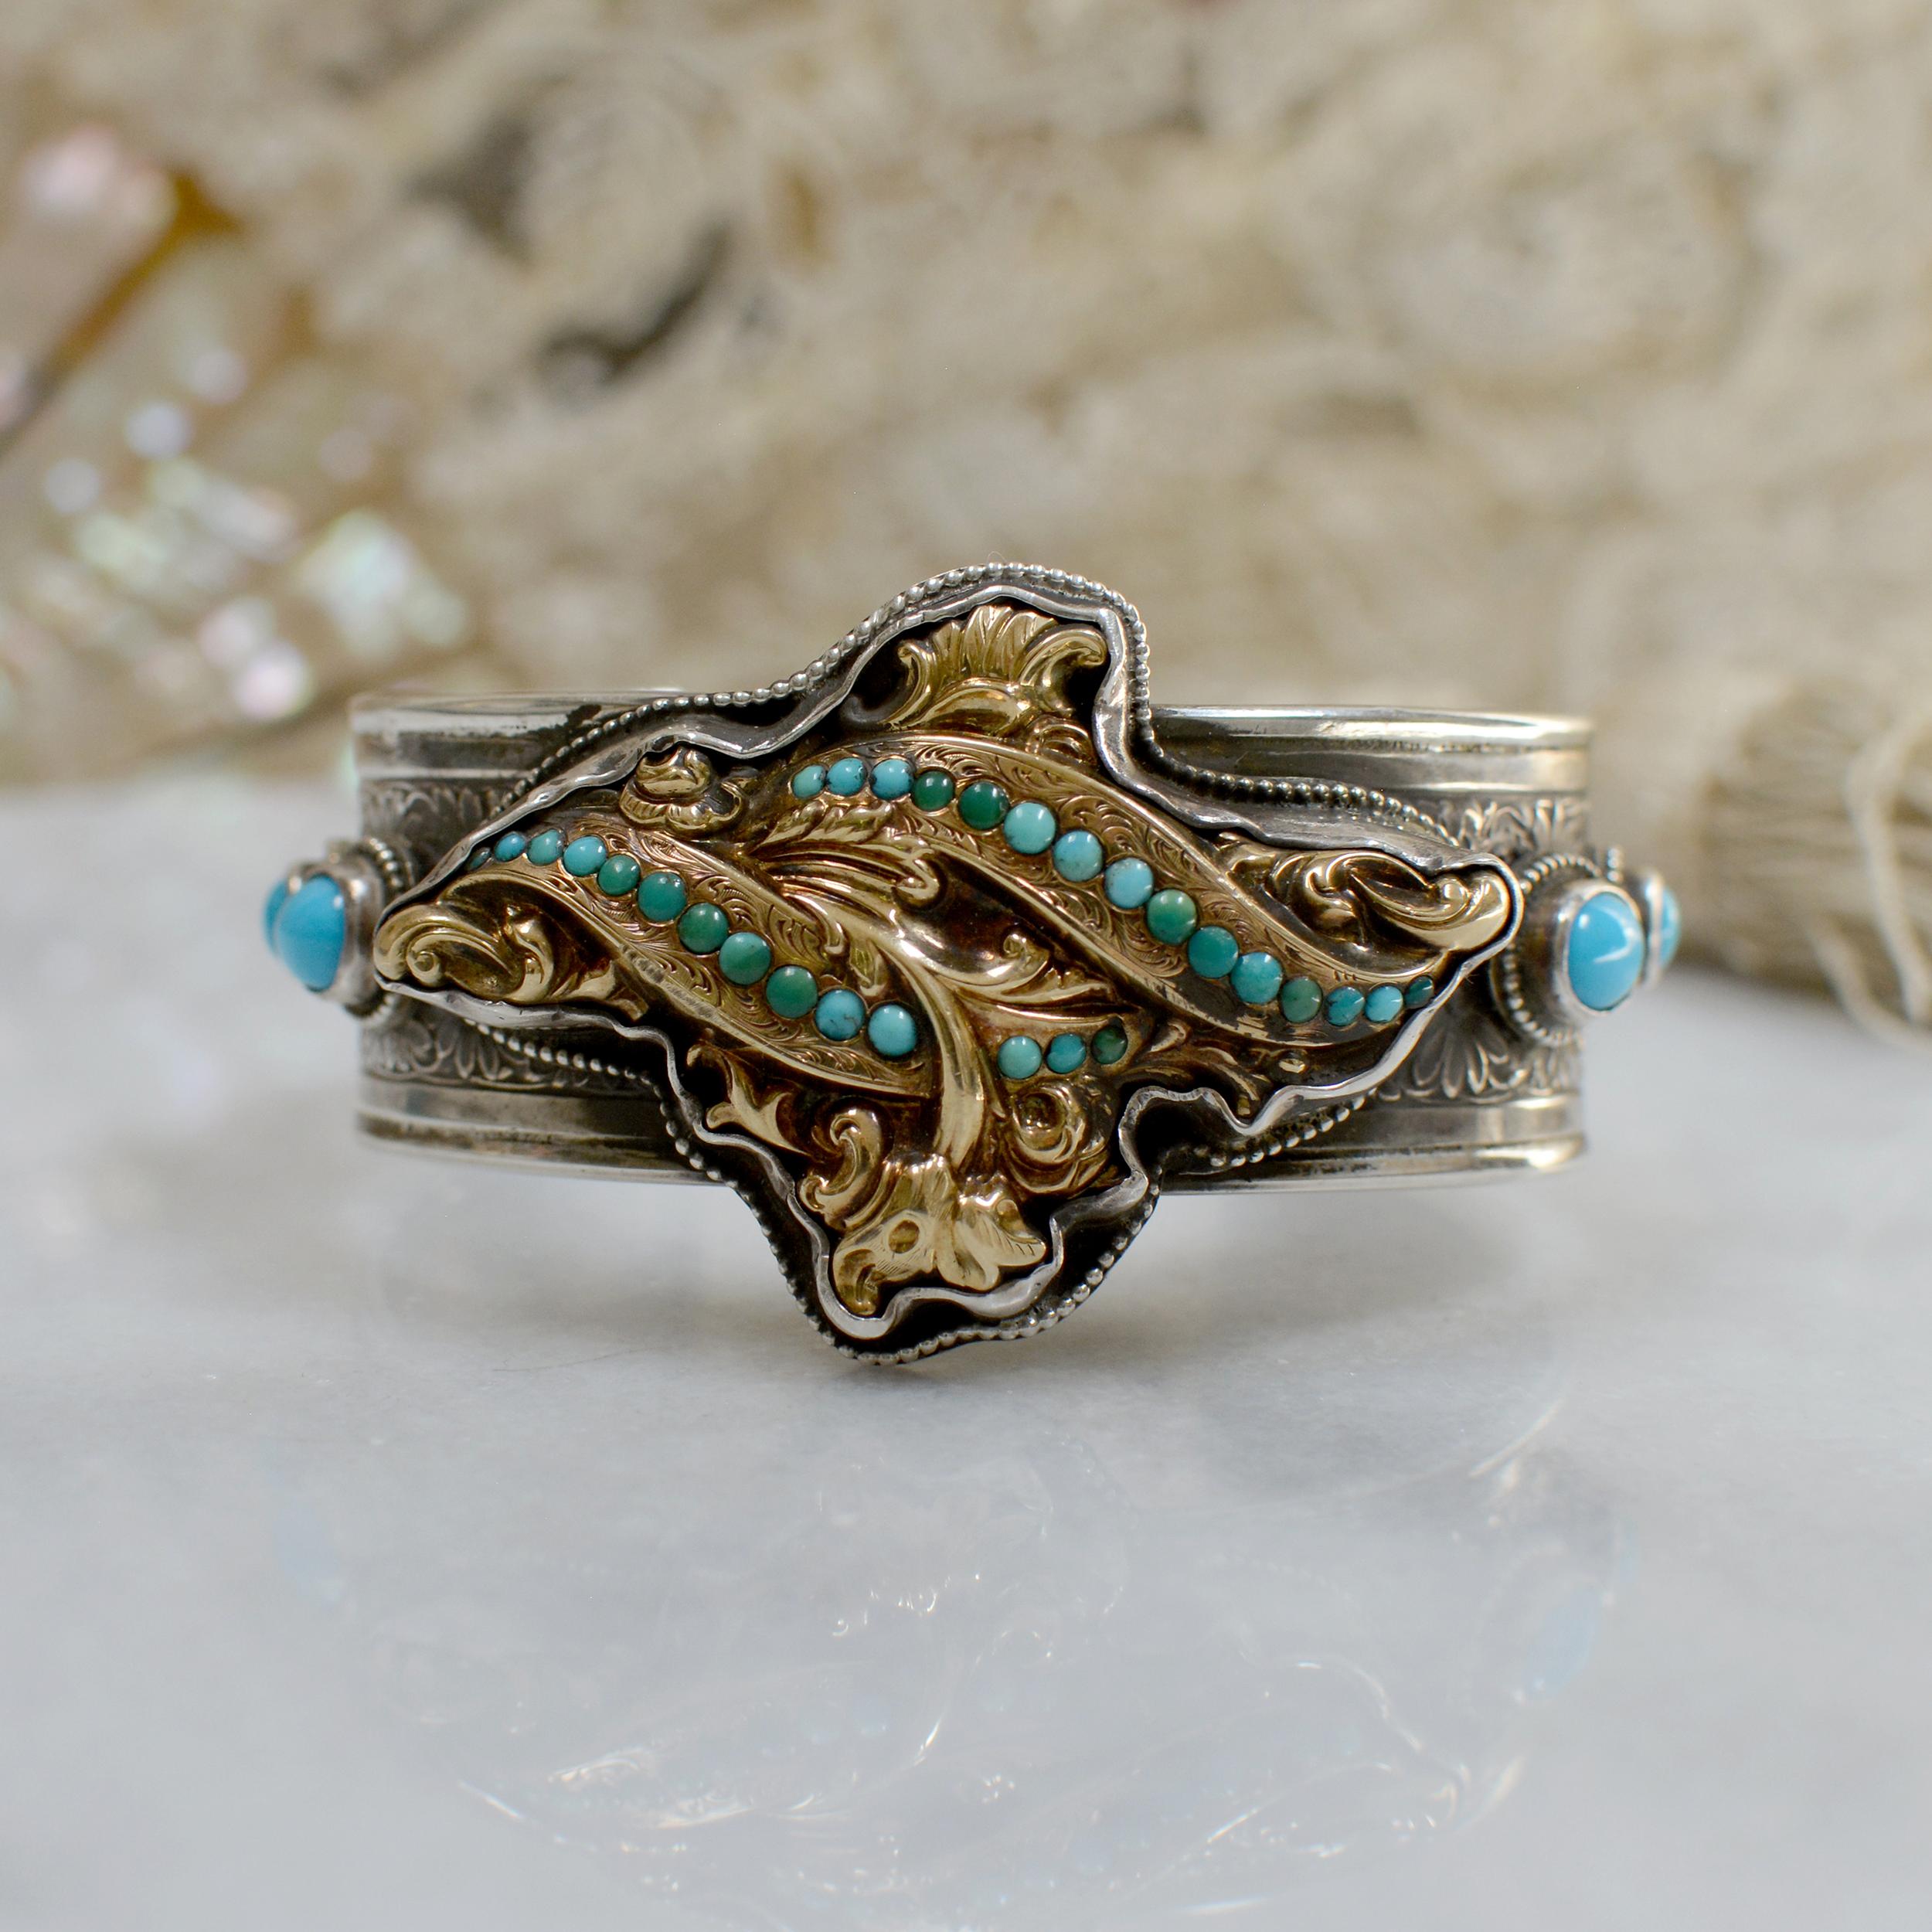 This one of a kind Sterling Silver and Gold cuff bracelet features a Georgian period 14 karat gold brooch delicately framed in beading. On either side are 8 x 6 mm oval and 5 mm Sleeping Beauty turquoise cabochons. An ornate figural floral cuff band